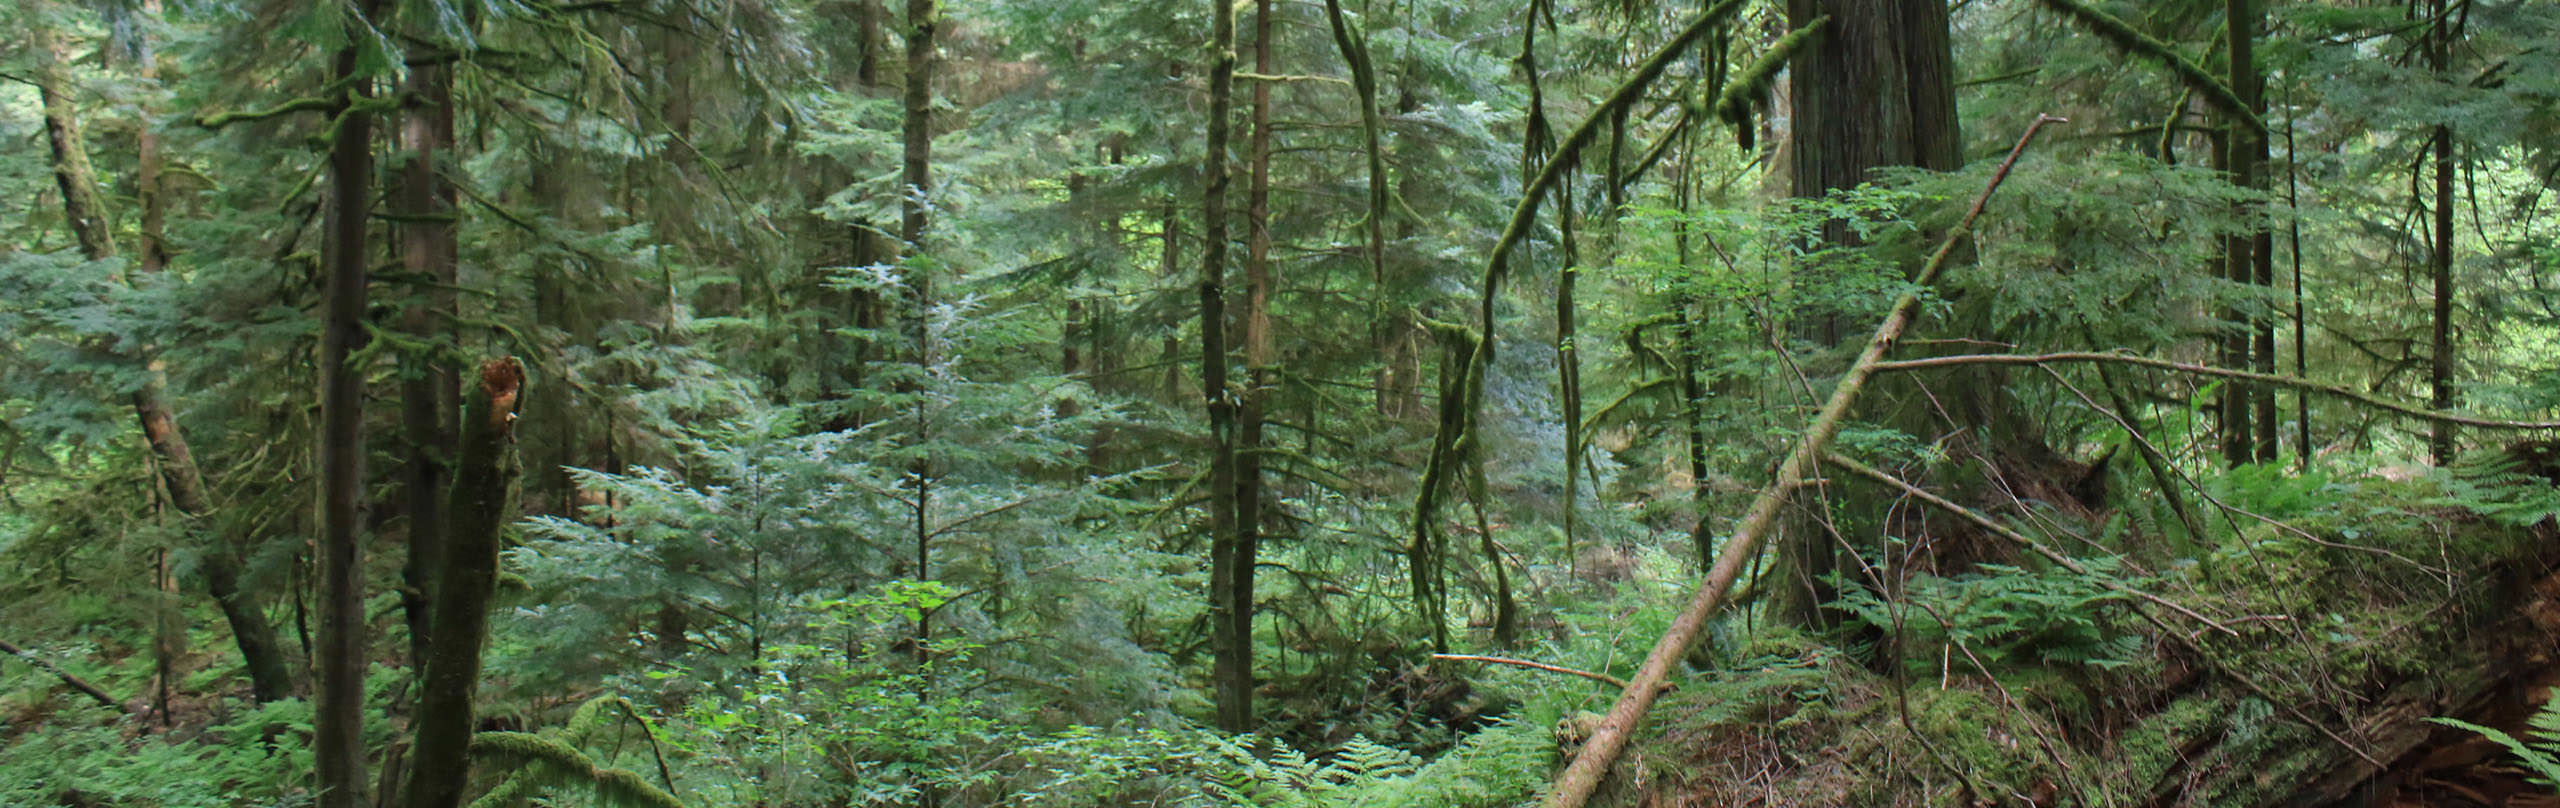 The forest on Bowen Island, BC